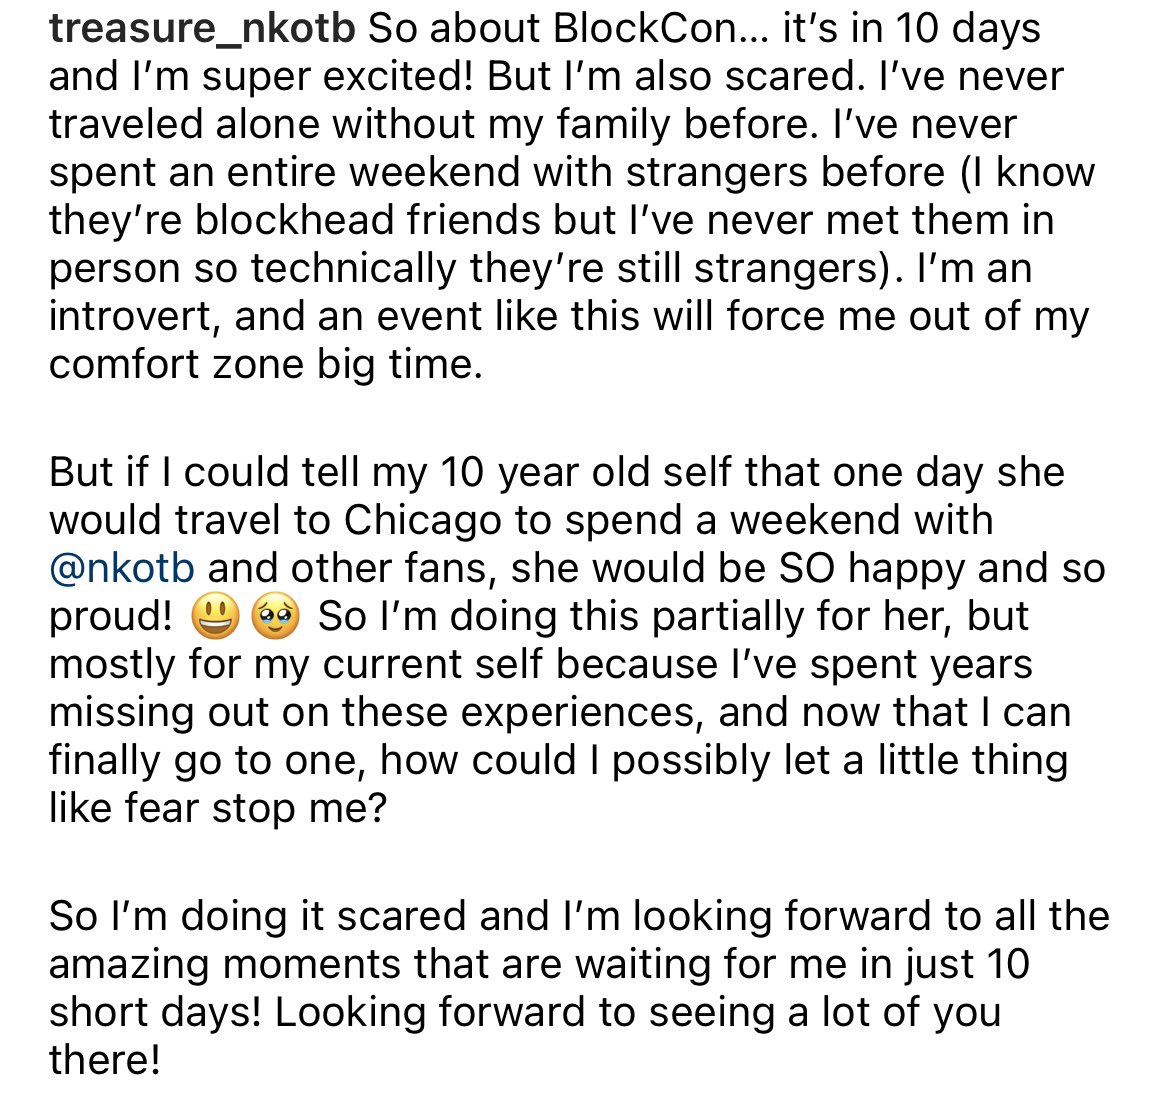 Some of my thoughts and feelings about BlockCon. It’s only 10 days away! 
@NKOTB #nkotb #blockcon #blockhead #doitscared